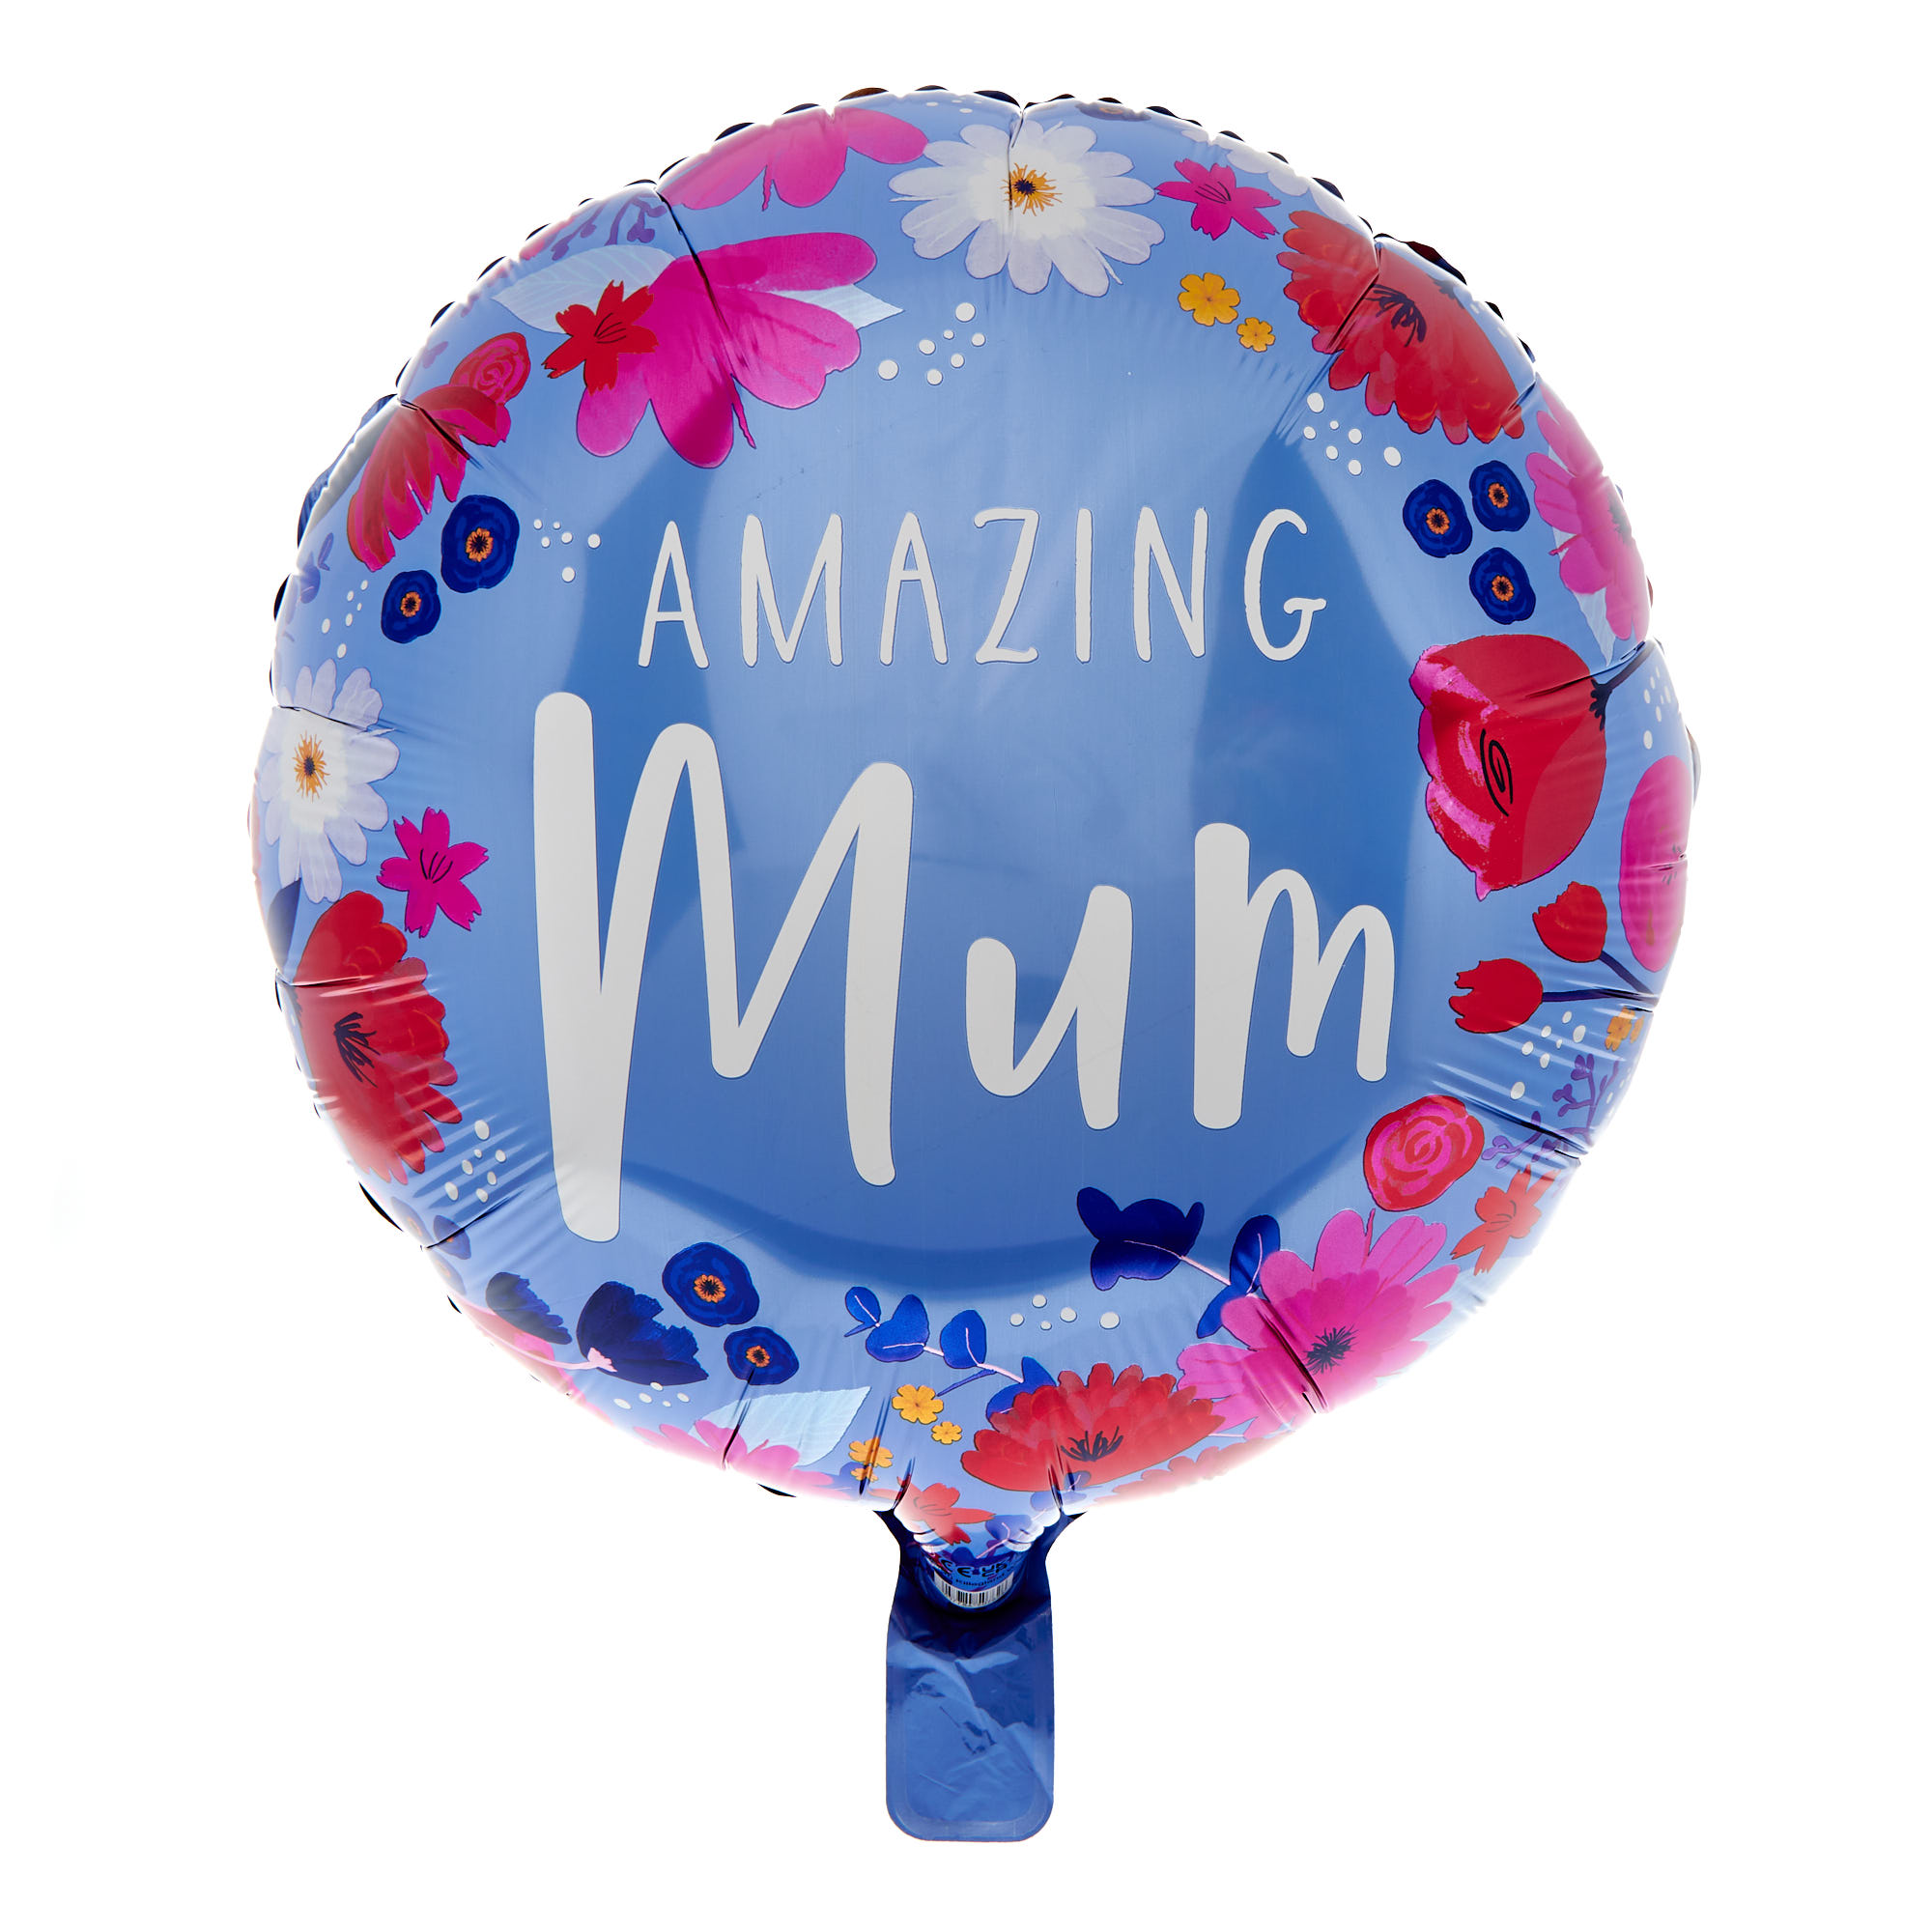 Amazing Mum Balloon Bouquet - Pre-Order For Mother's Day!